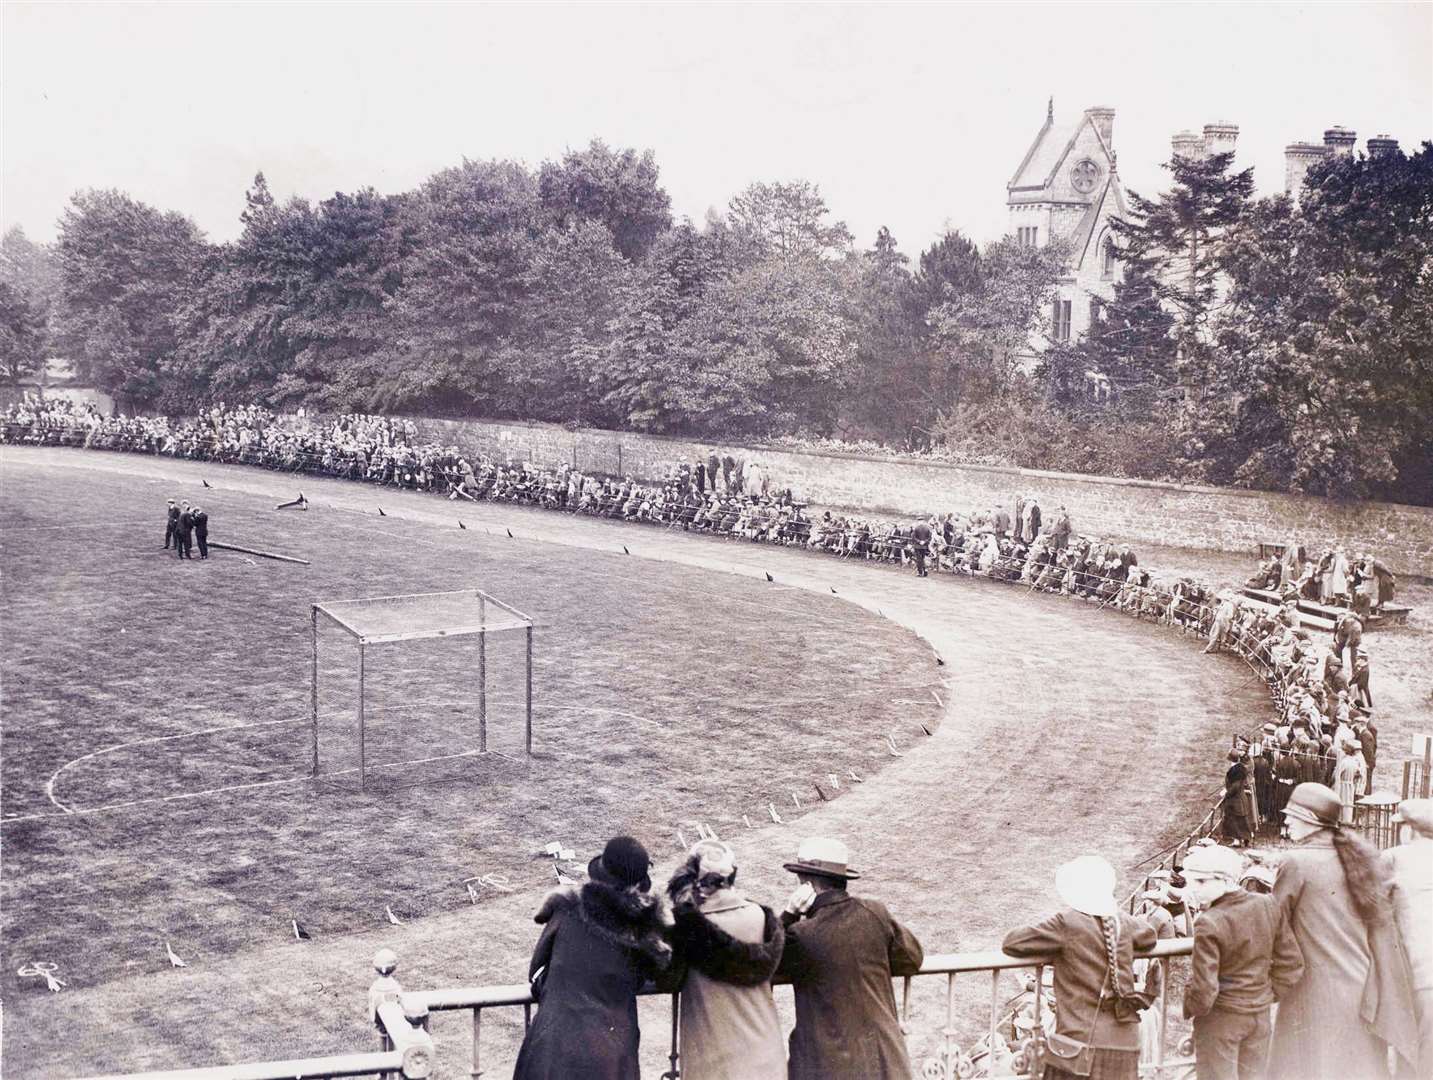 Spectators watching the Northern Meeting Games at the Northern Meeting Park in Inverness, circa 1920s.